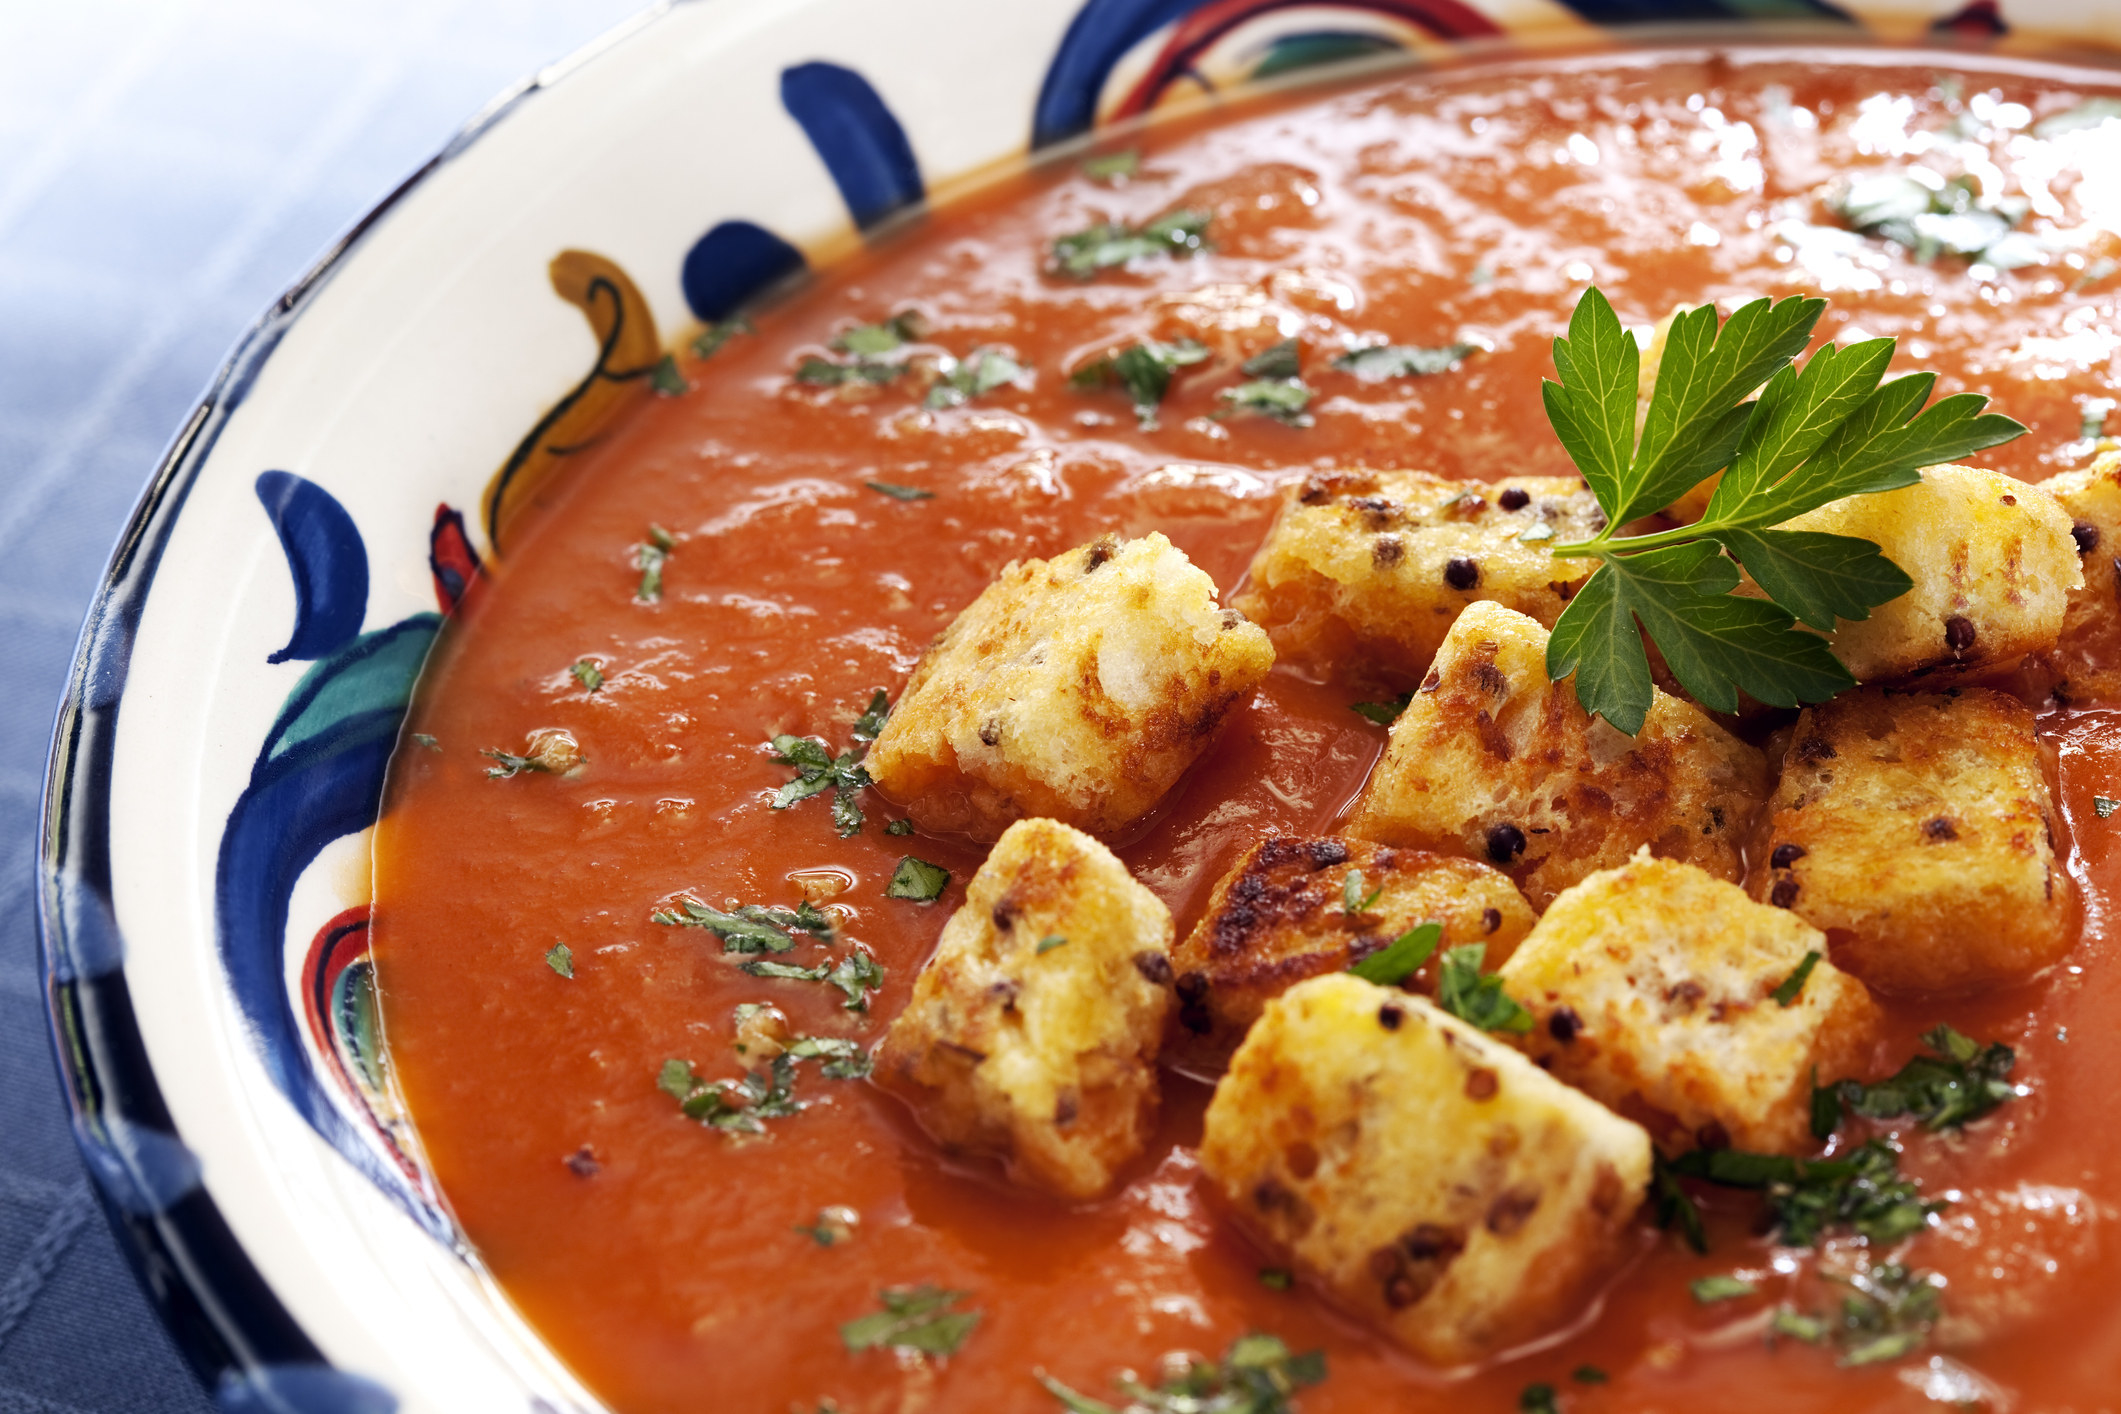 Tomato soup with croutons.